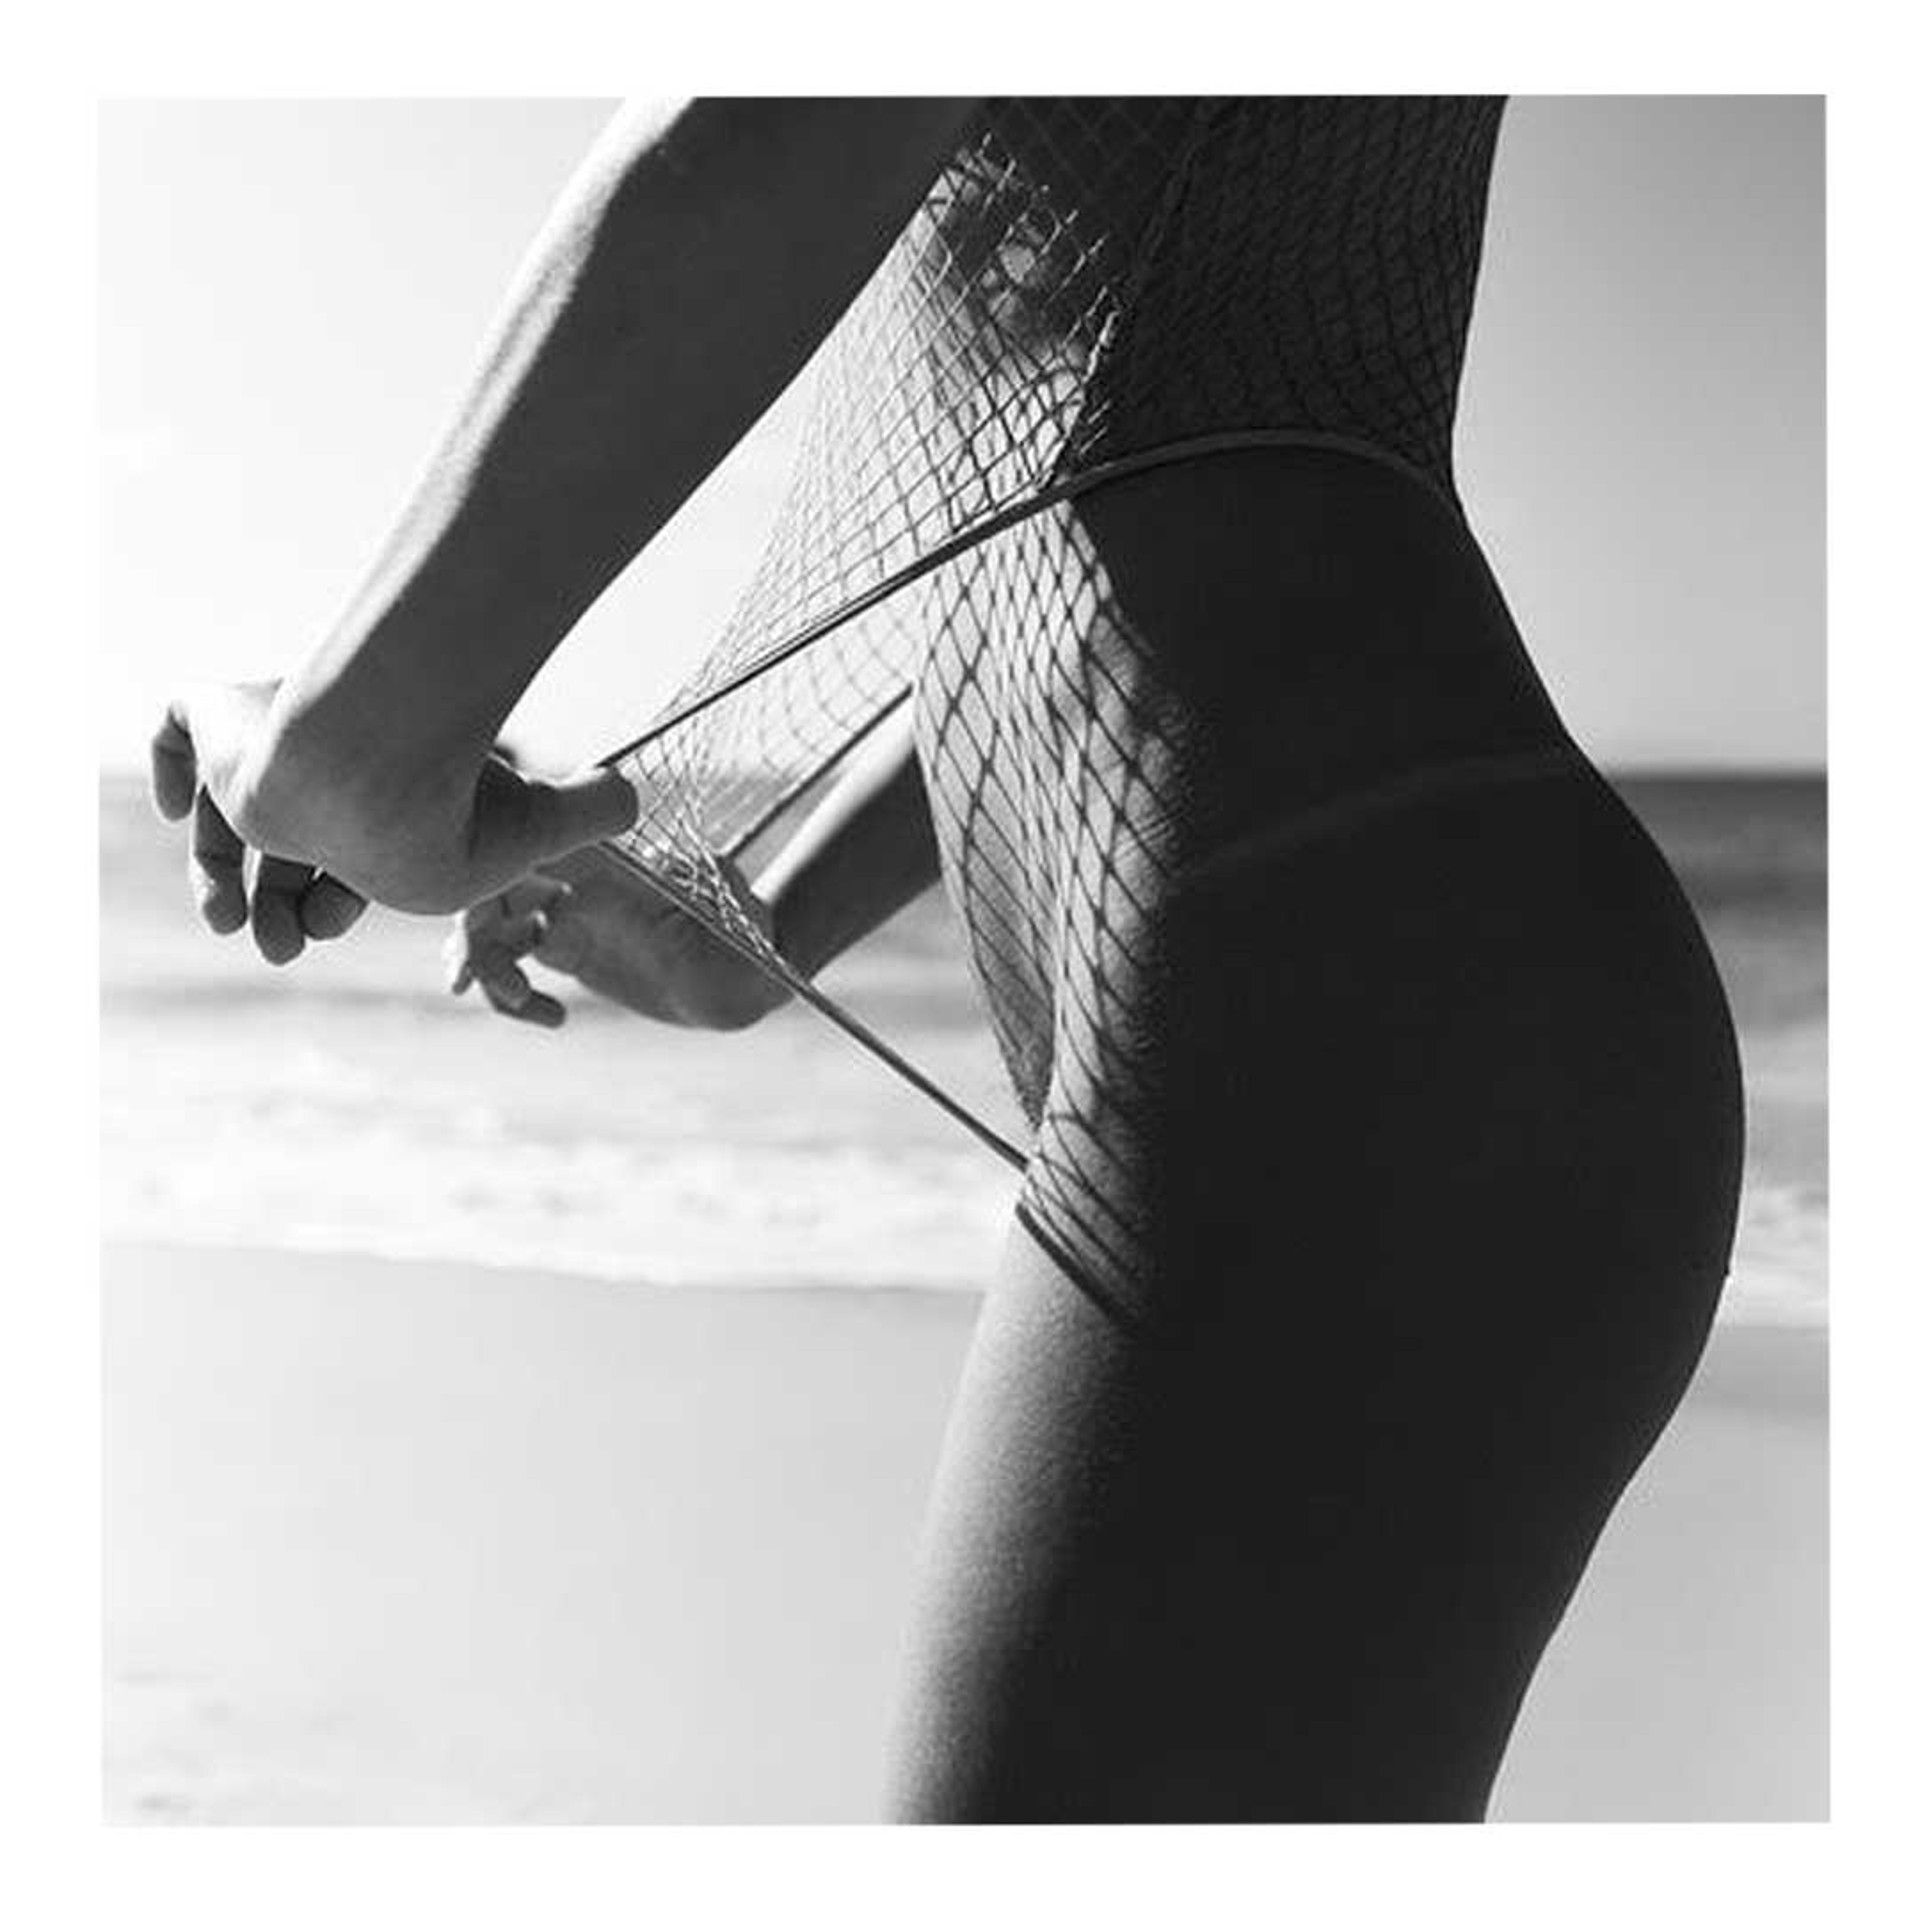 Laila Fishnets (St Barth) by Jean-Philippe Piter